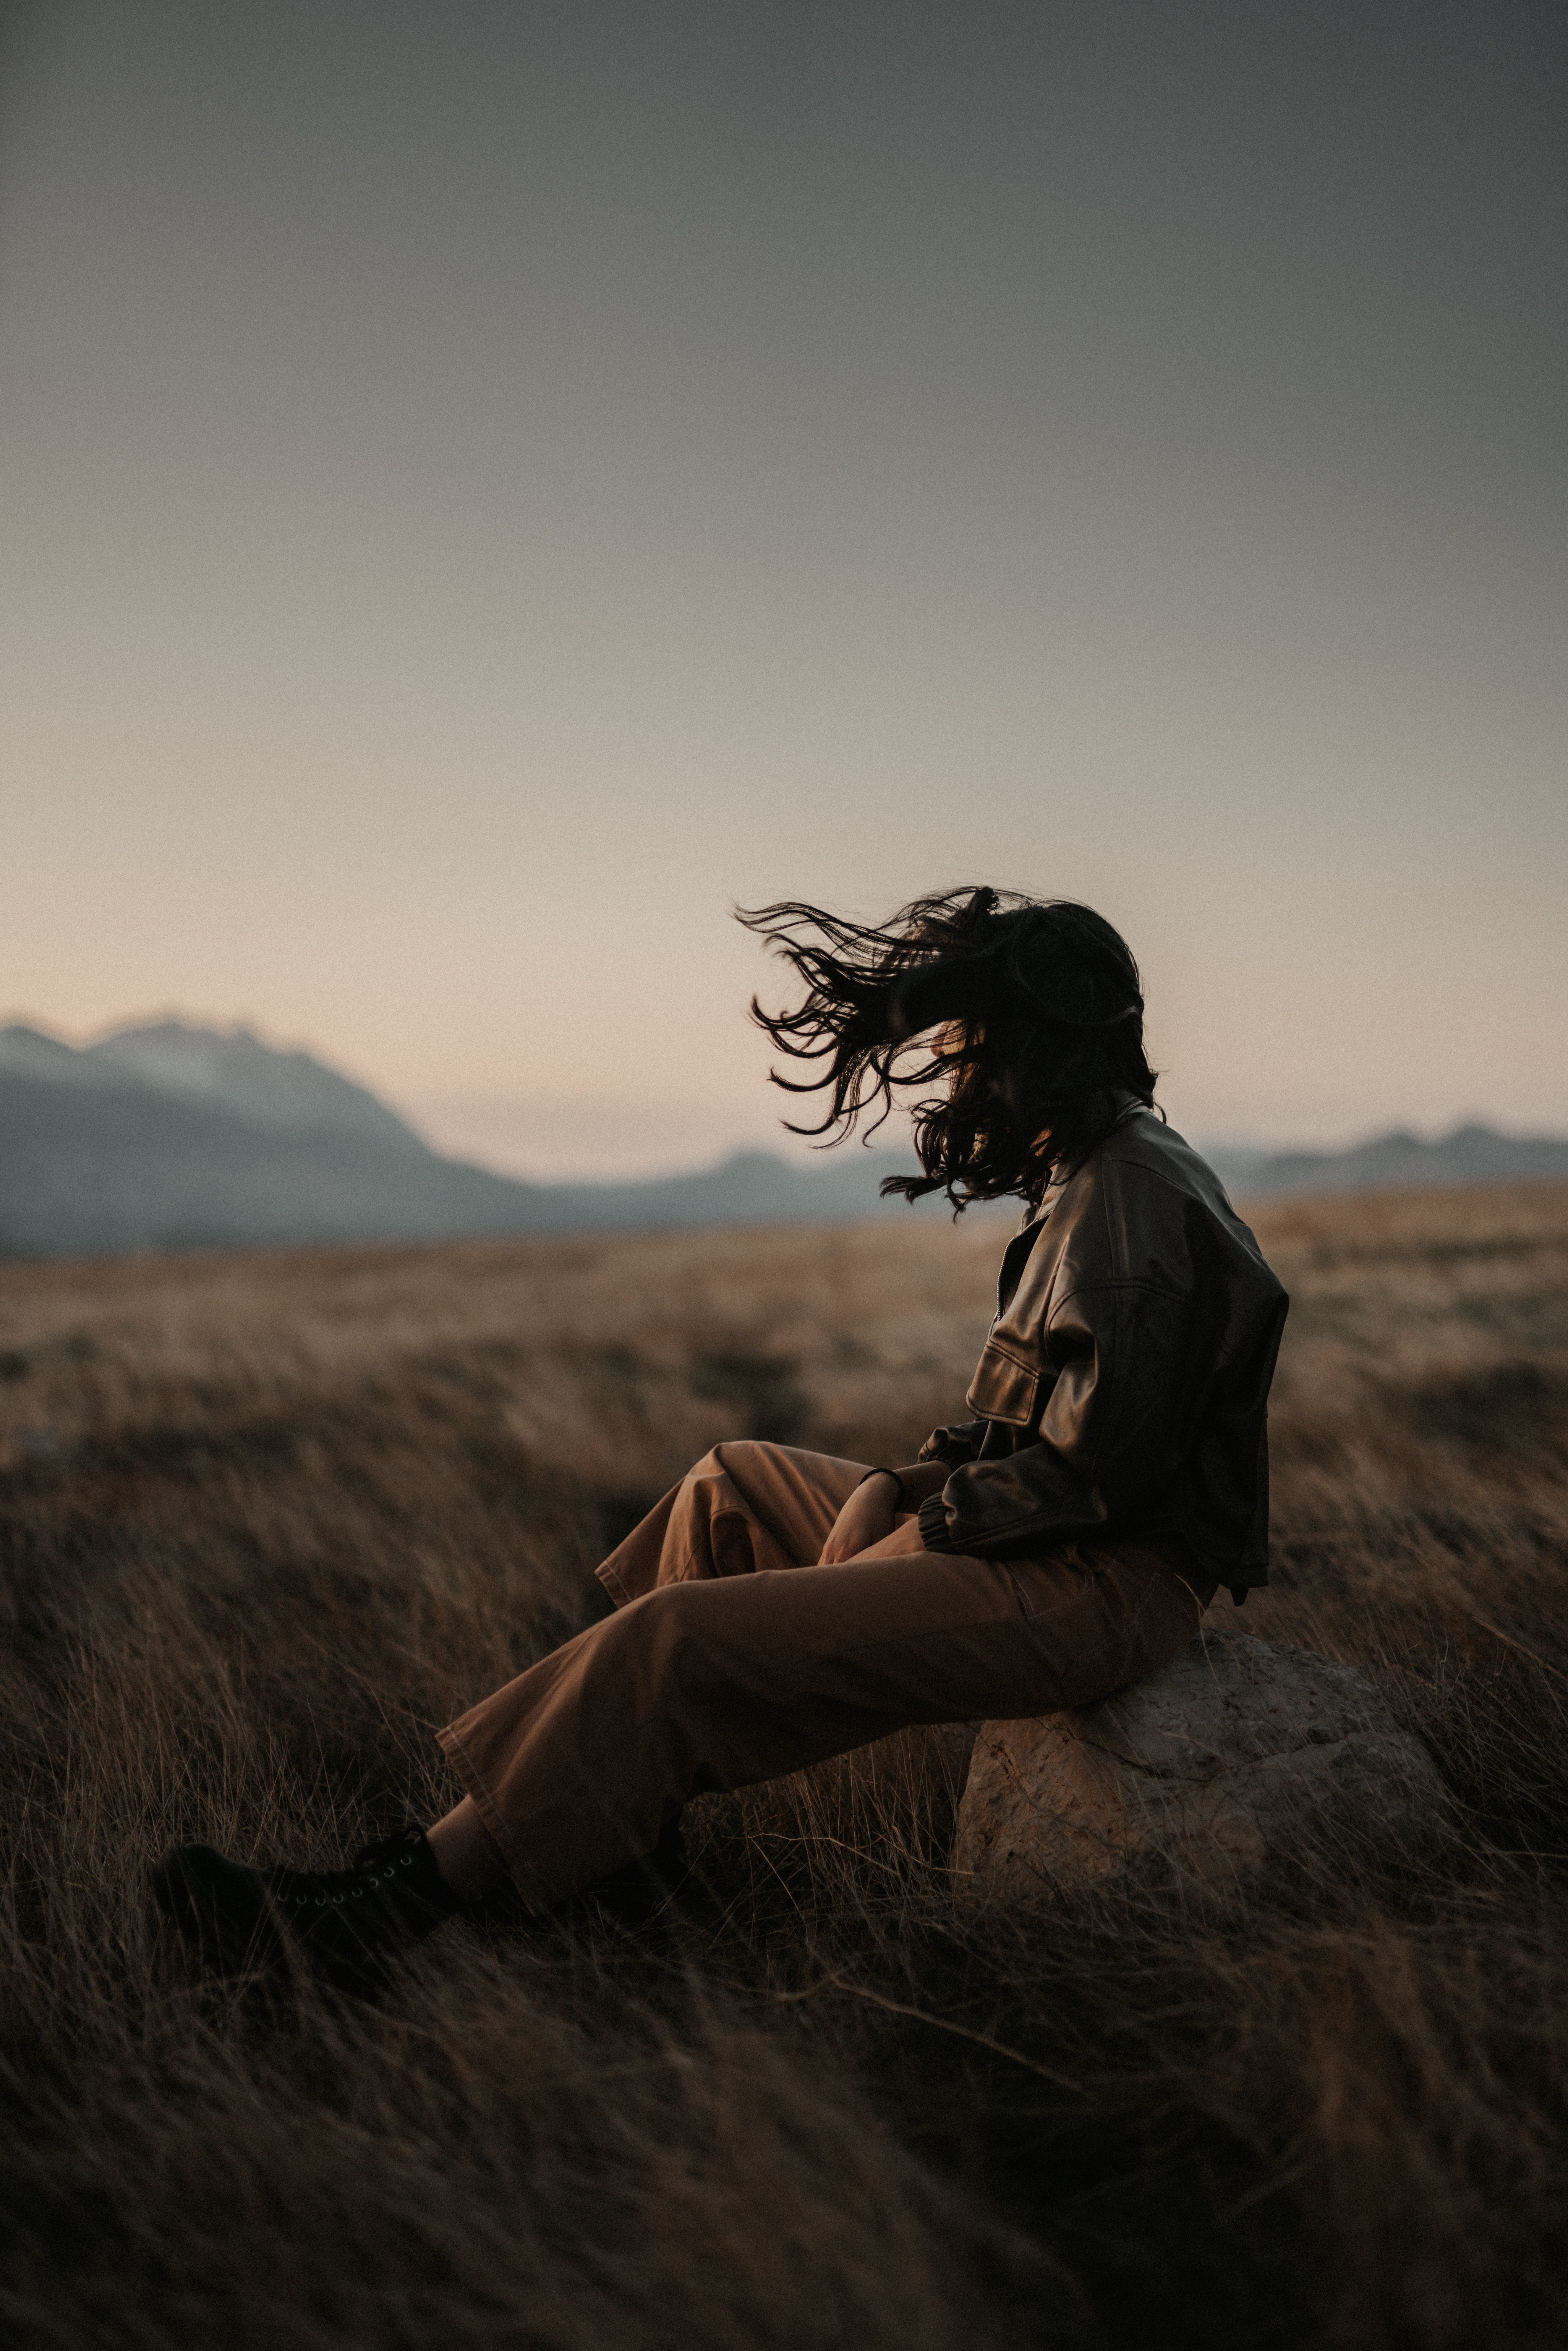 miscellanea, loneliness, miscellaneous, wind, grass, person, human, hair